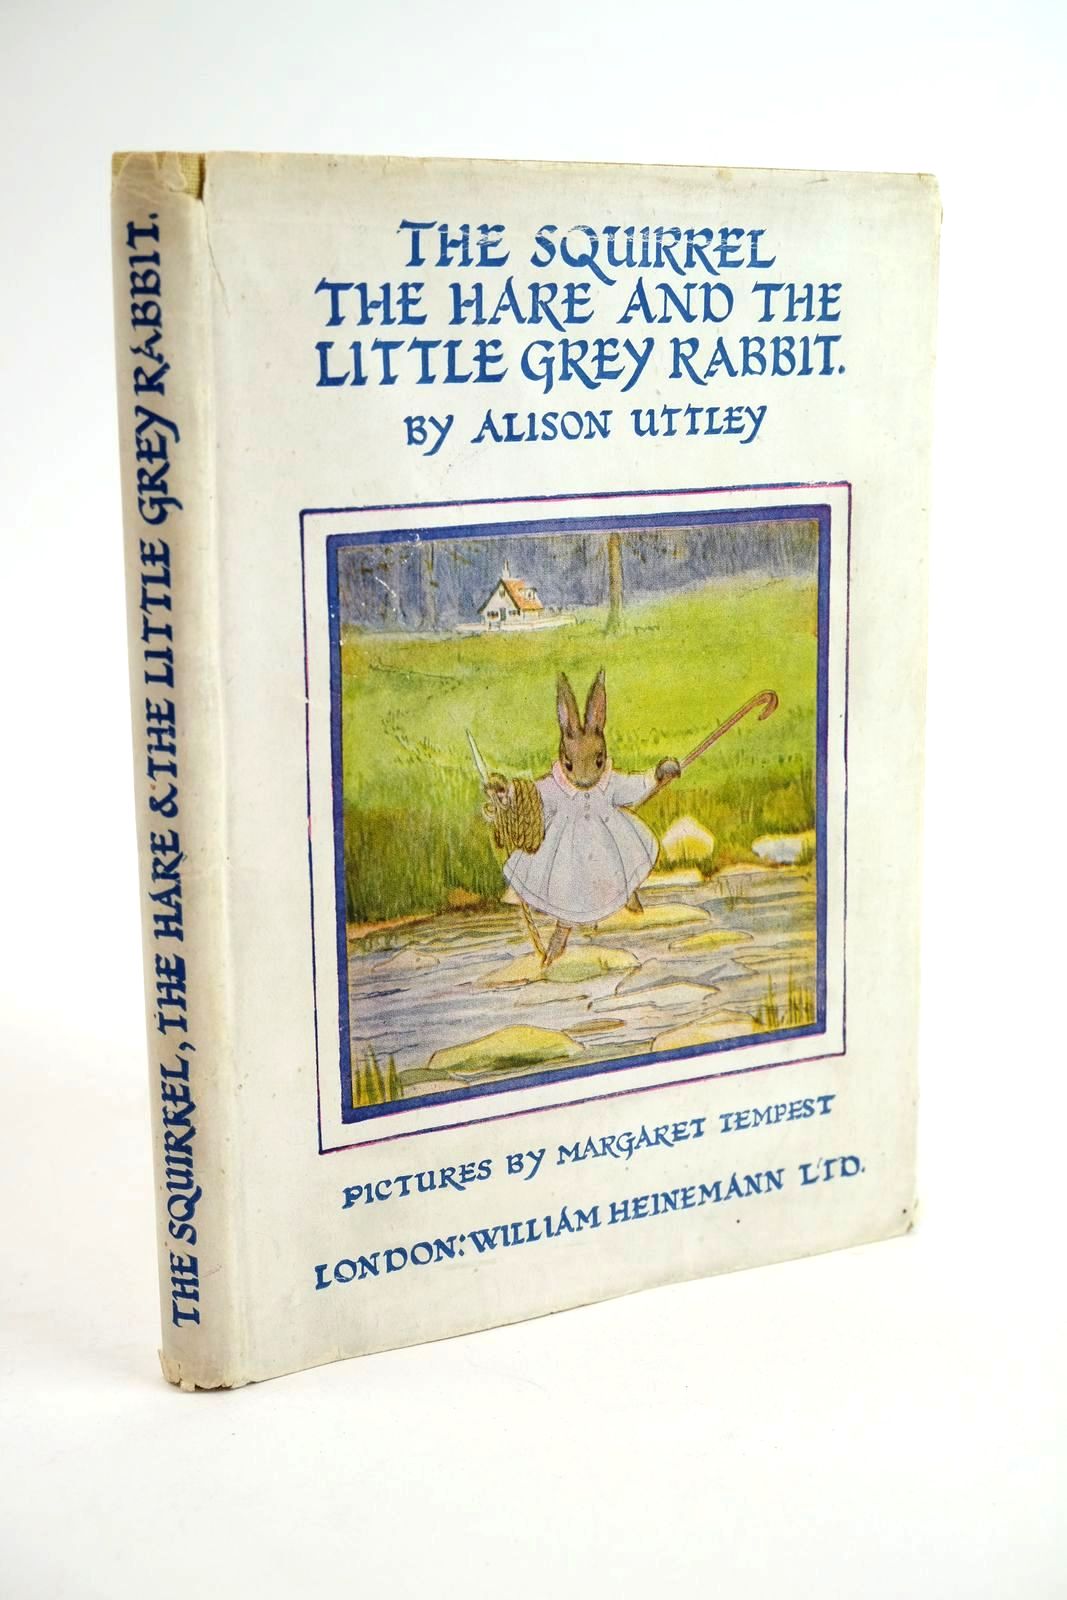 Photo of THE SQUIRREL, THE HARE AND THE LITTLE GREY RABBIT written by Uttley, Alison illustrated by Tempest, Margaret published by William Heinemann Ltd. (STOCK CODE: 1323456)  for sale by Stella & Rose's Books